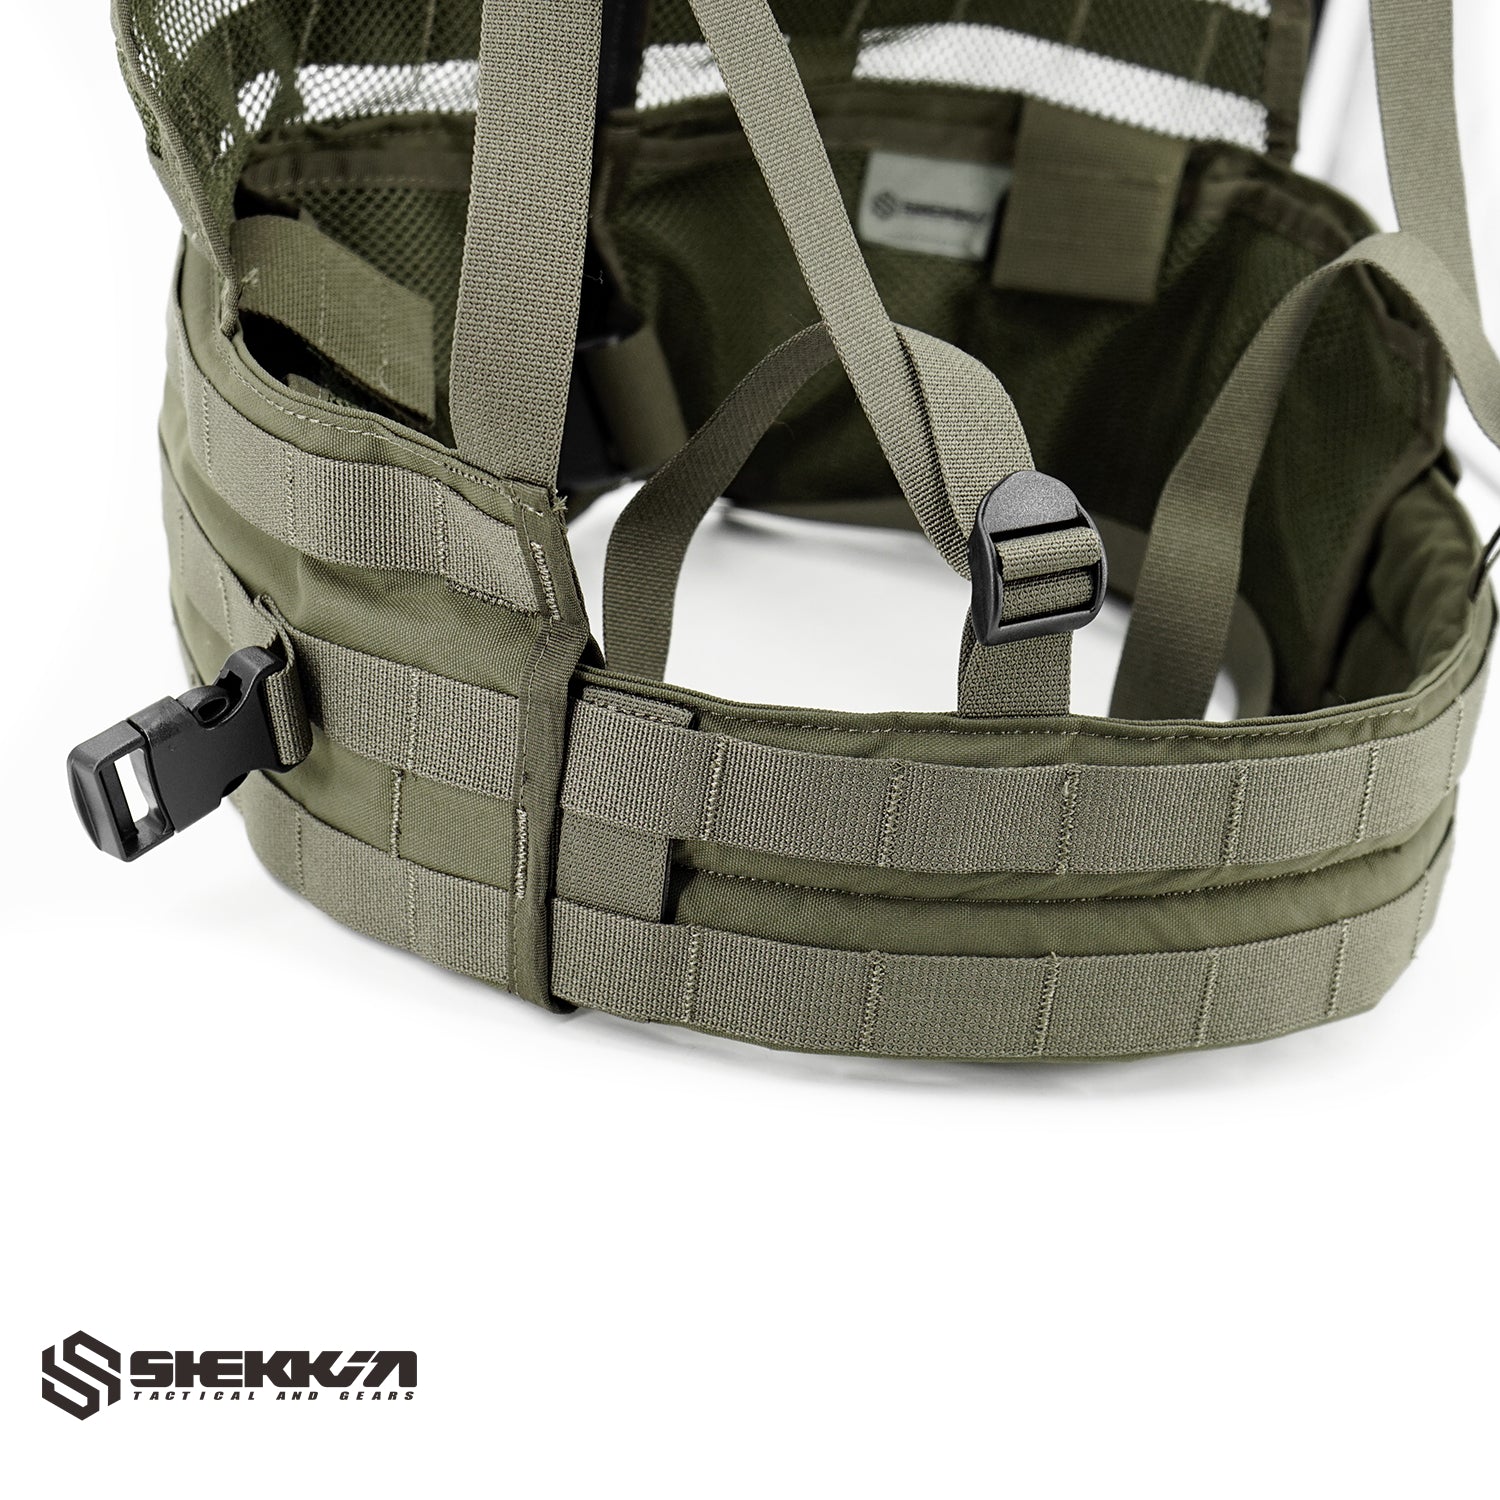 Pre MSA Paraclet style Super FLC load Carrying System - Shekkin Gears